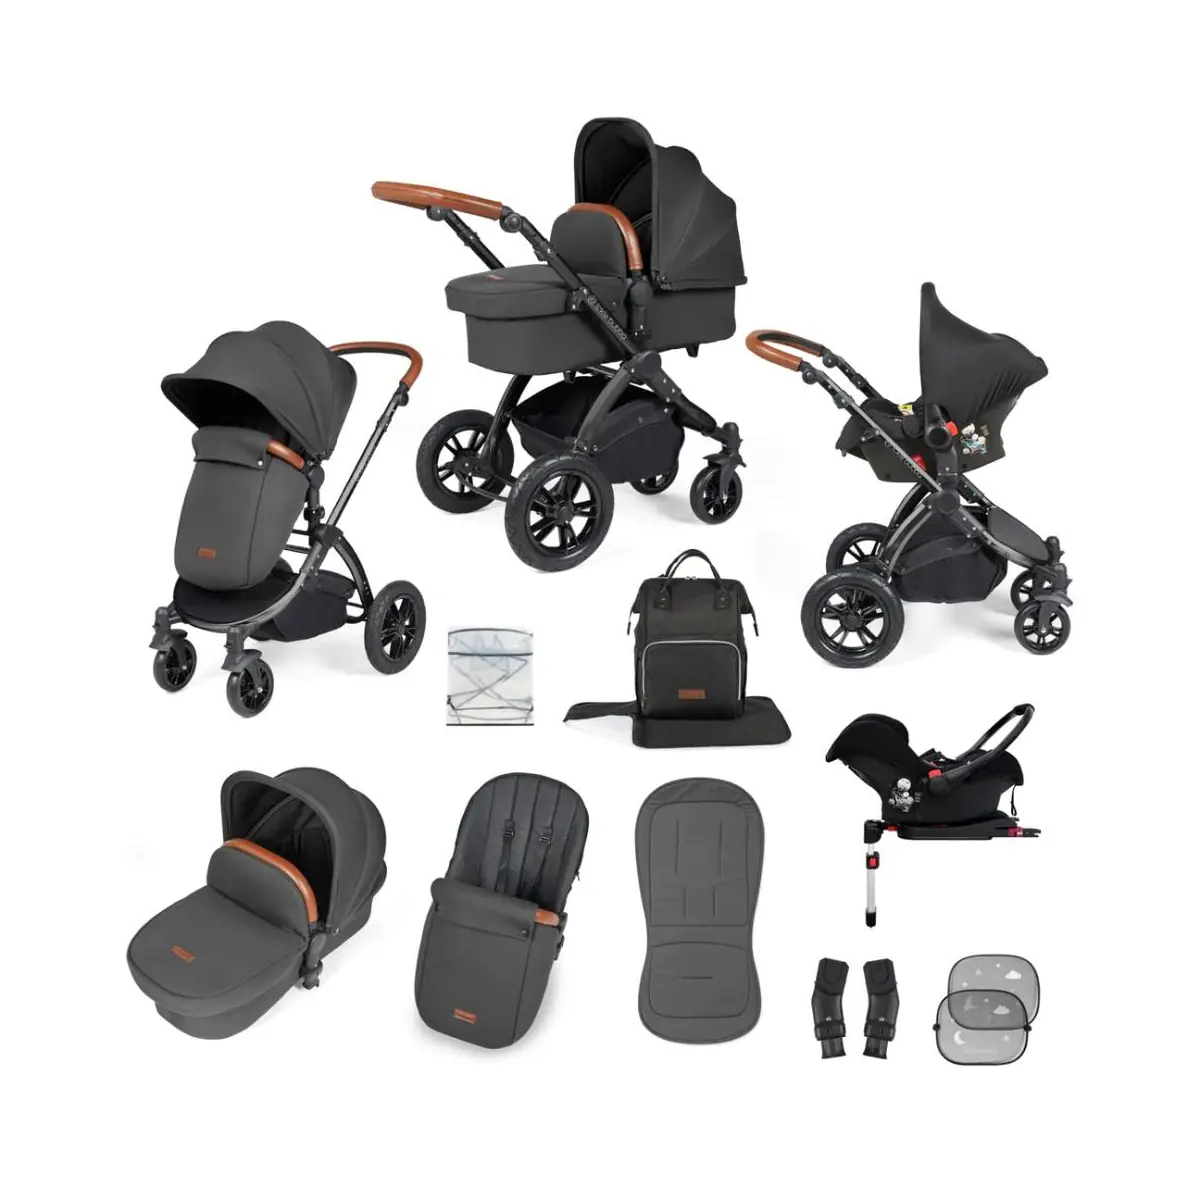 Image of Ickle Bubba Stomp Luxe Black Frame Travel System with Galaxy Carseat & Isofix Base - Black/Charcoal Grey/Tan